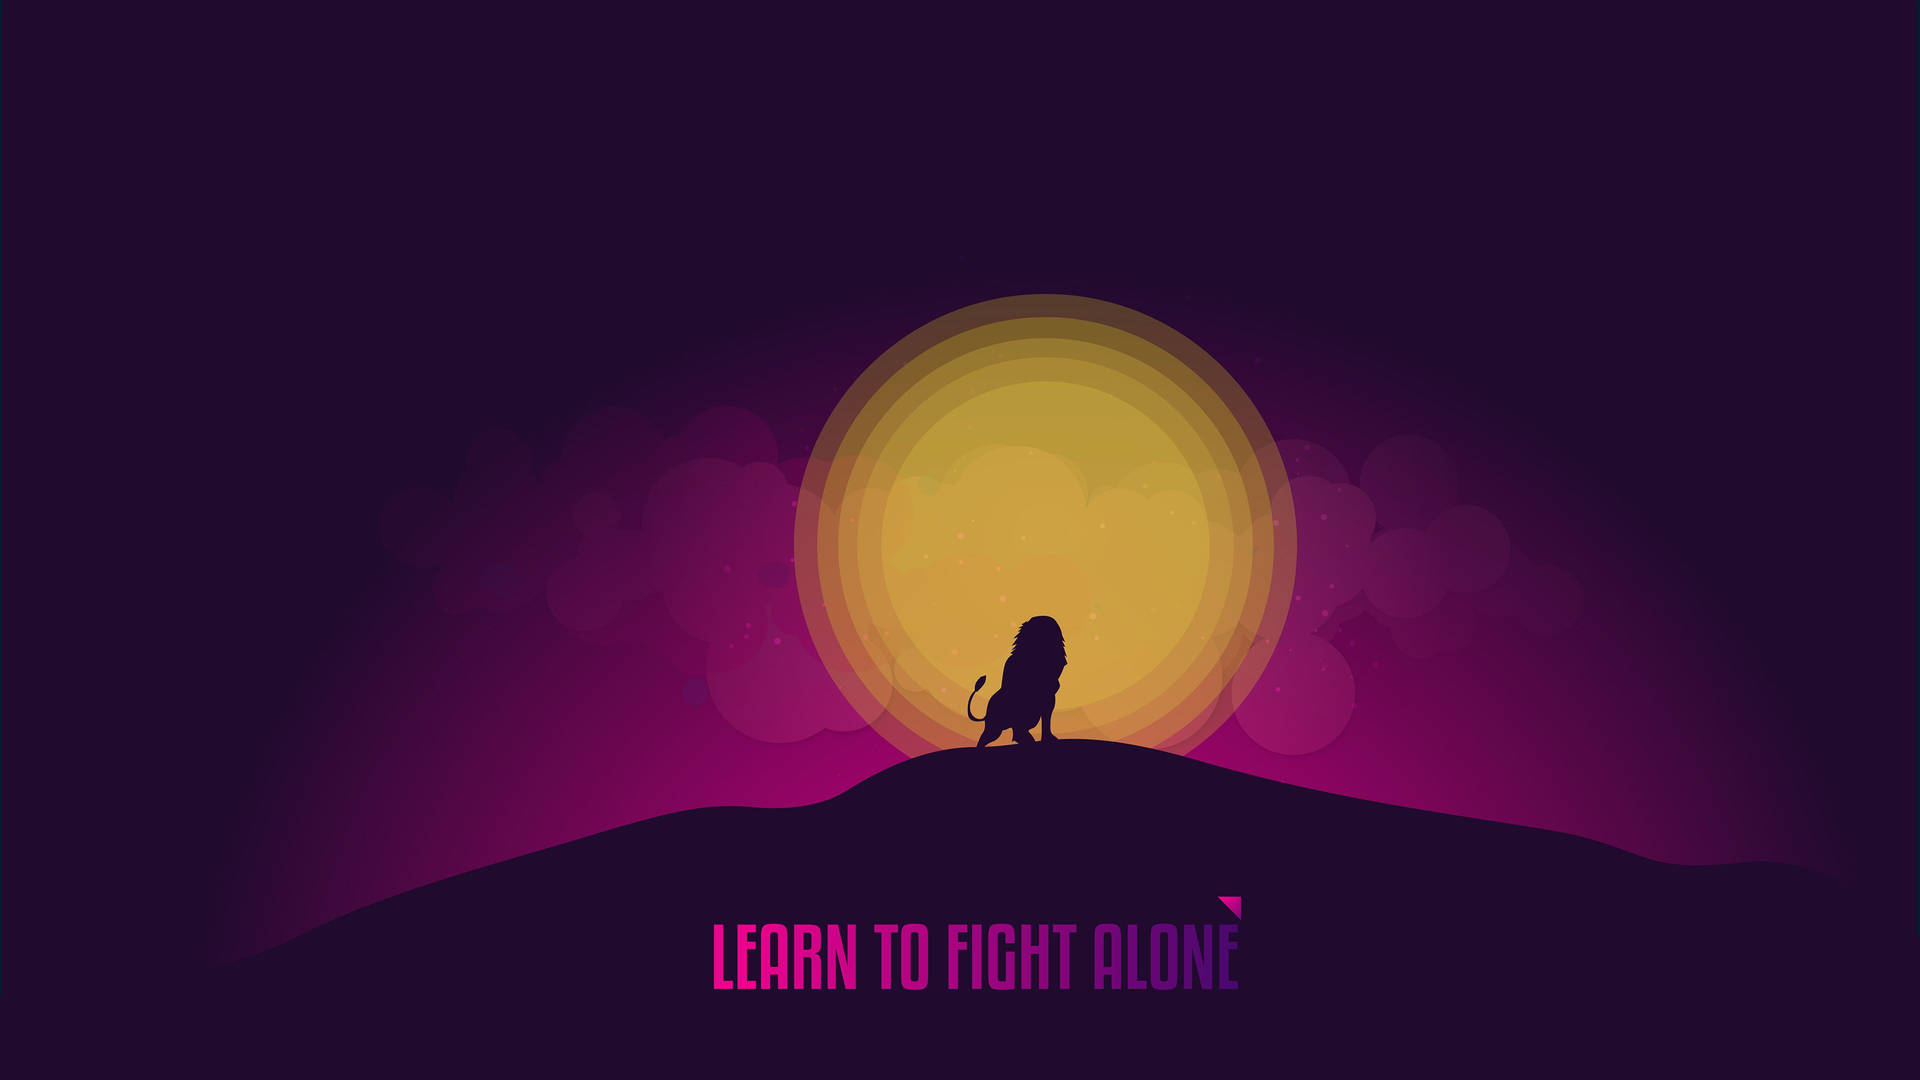 Lion’s Silhouette Inspirational Laptop Background